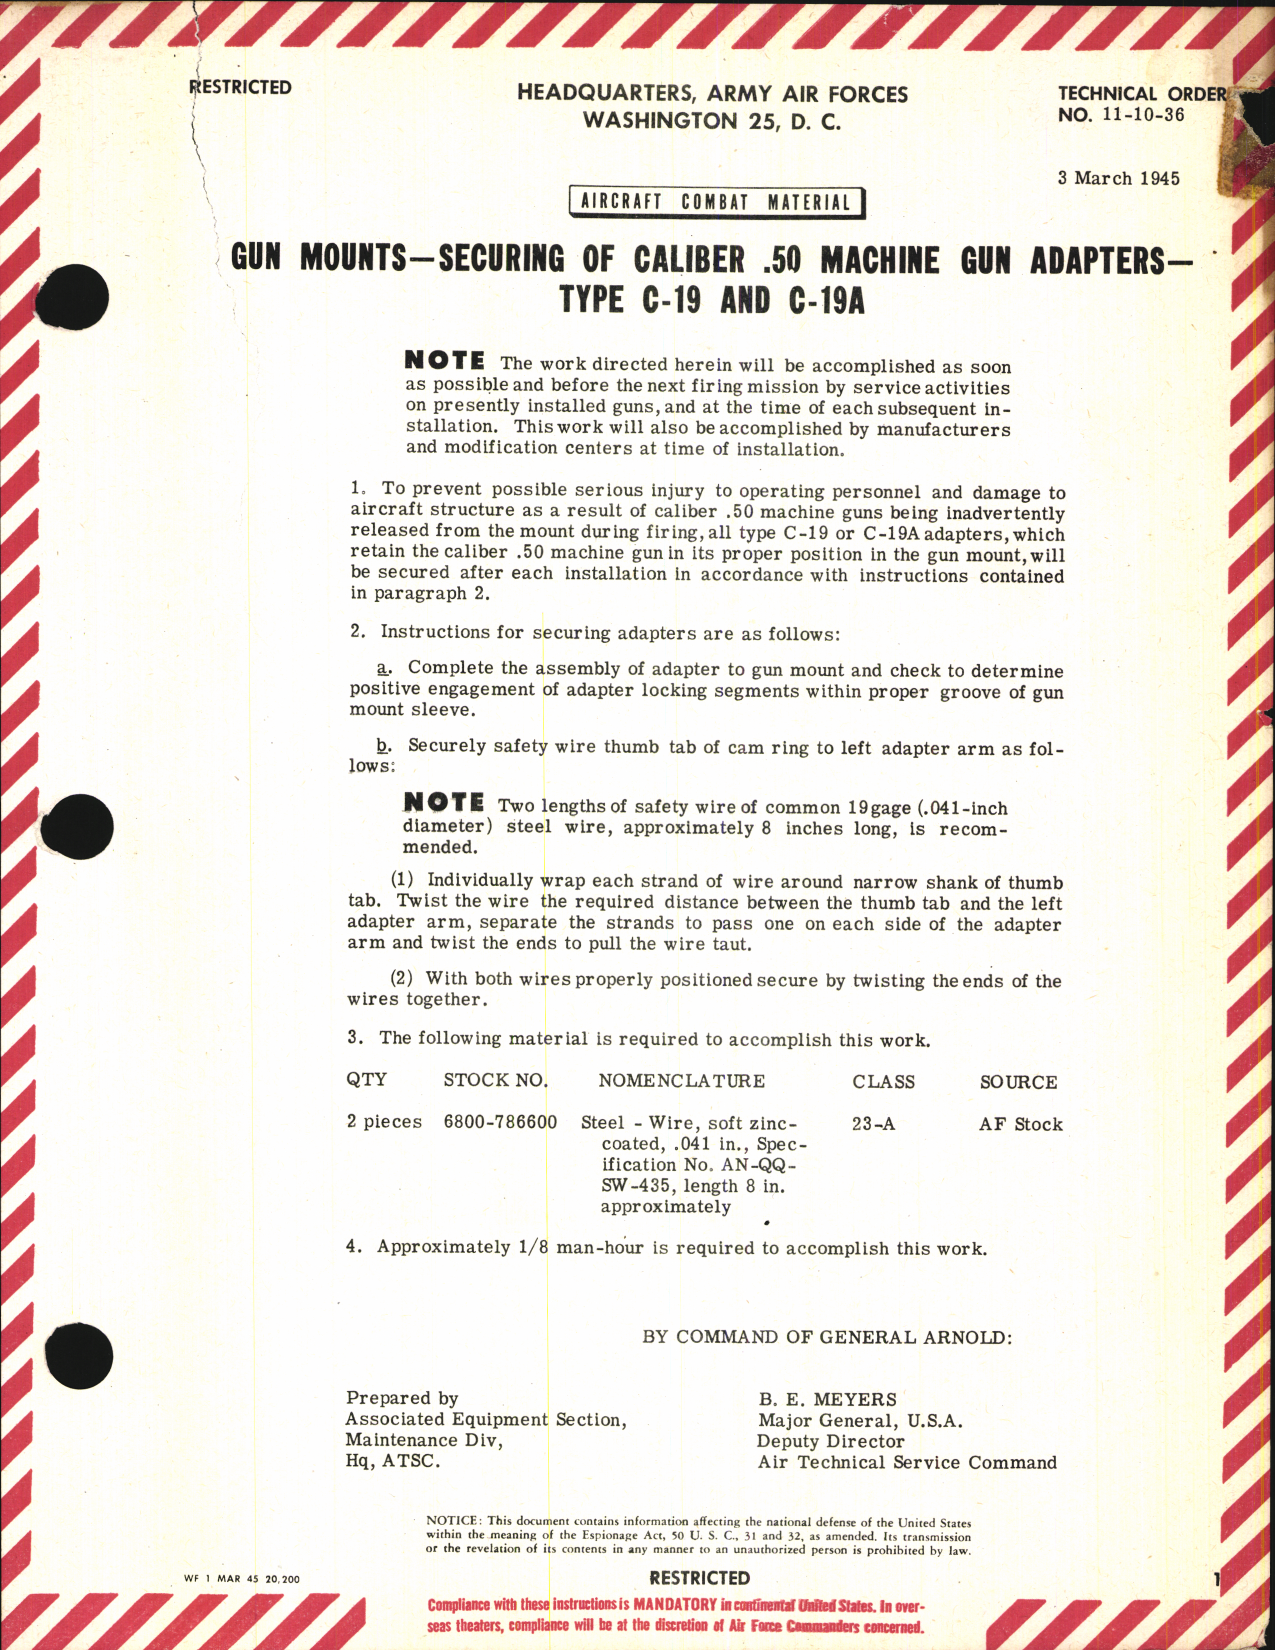 Sample page 1 from AirCorps Library document: Securing Caliber .50 Machine Gun Adapters for Type C-19 and C-19A Gun Mounts